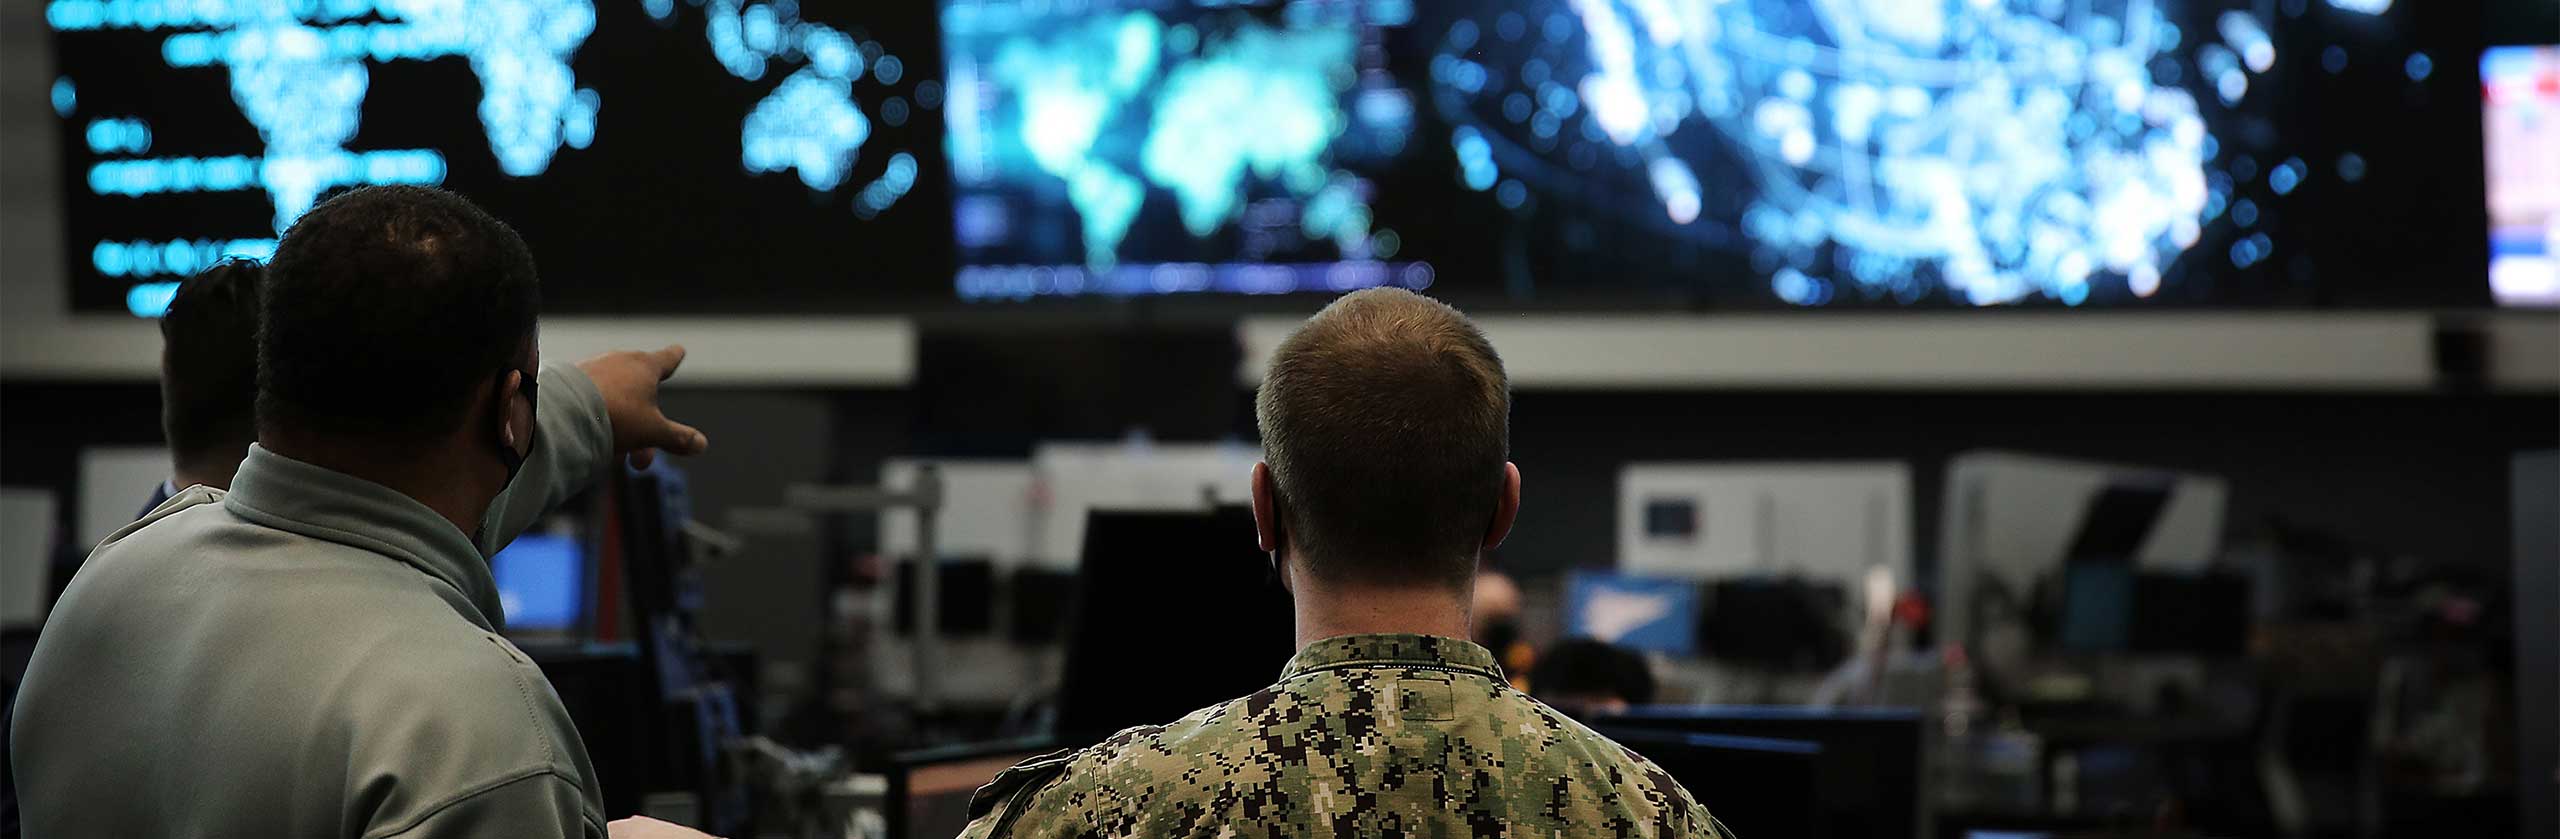 U.S. Cyber Command members work in the Integrated Cyber Center, Joint Operations Center at Fort George G. Meade, Md., April. 2, 2021.